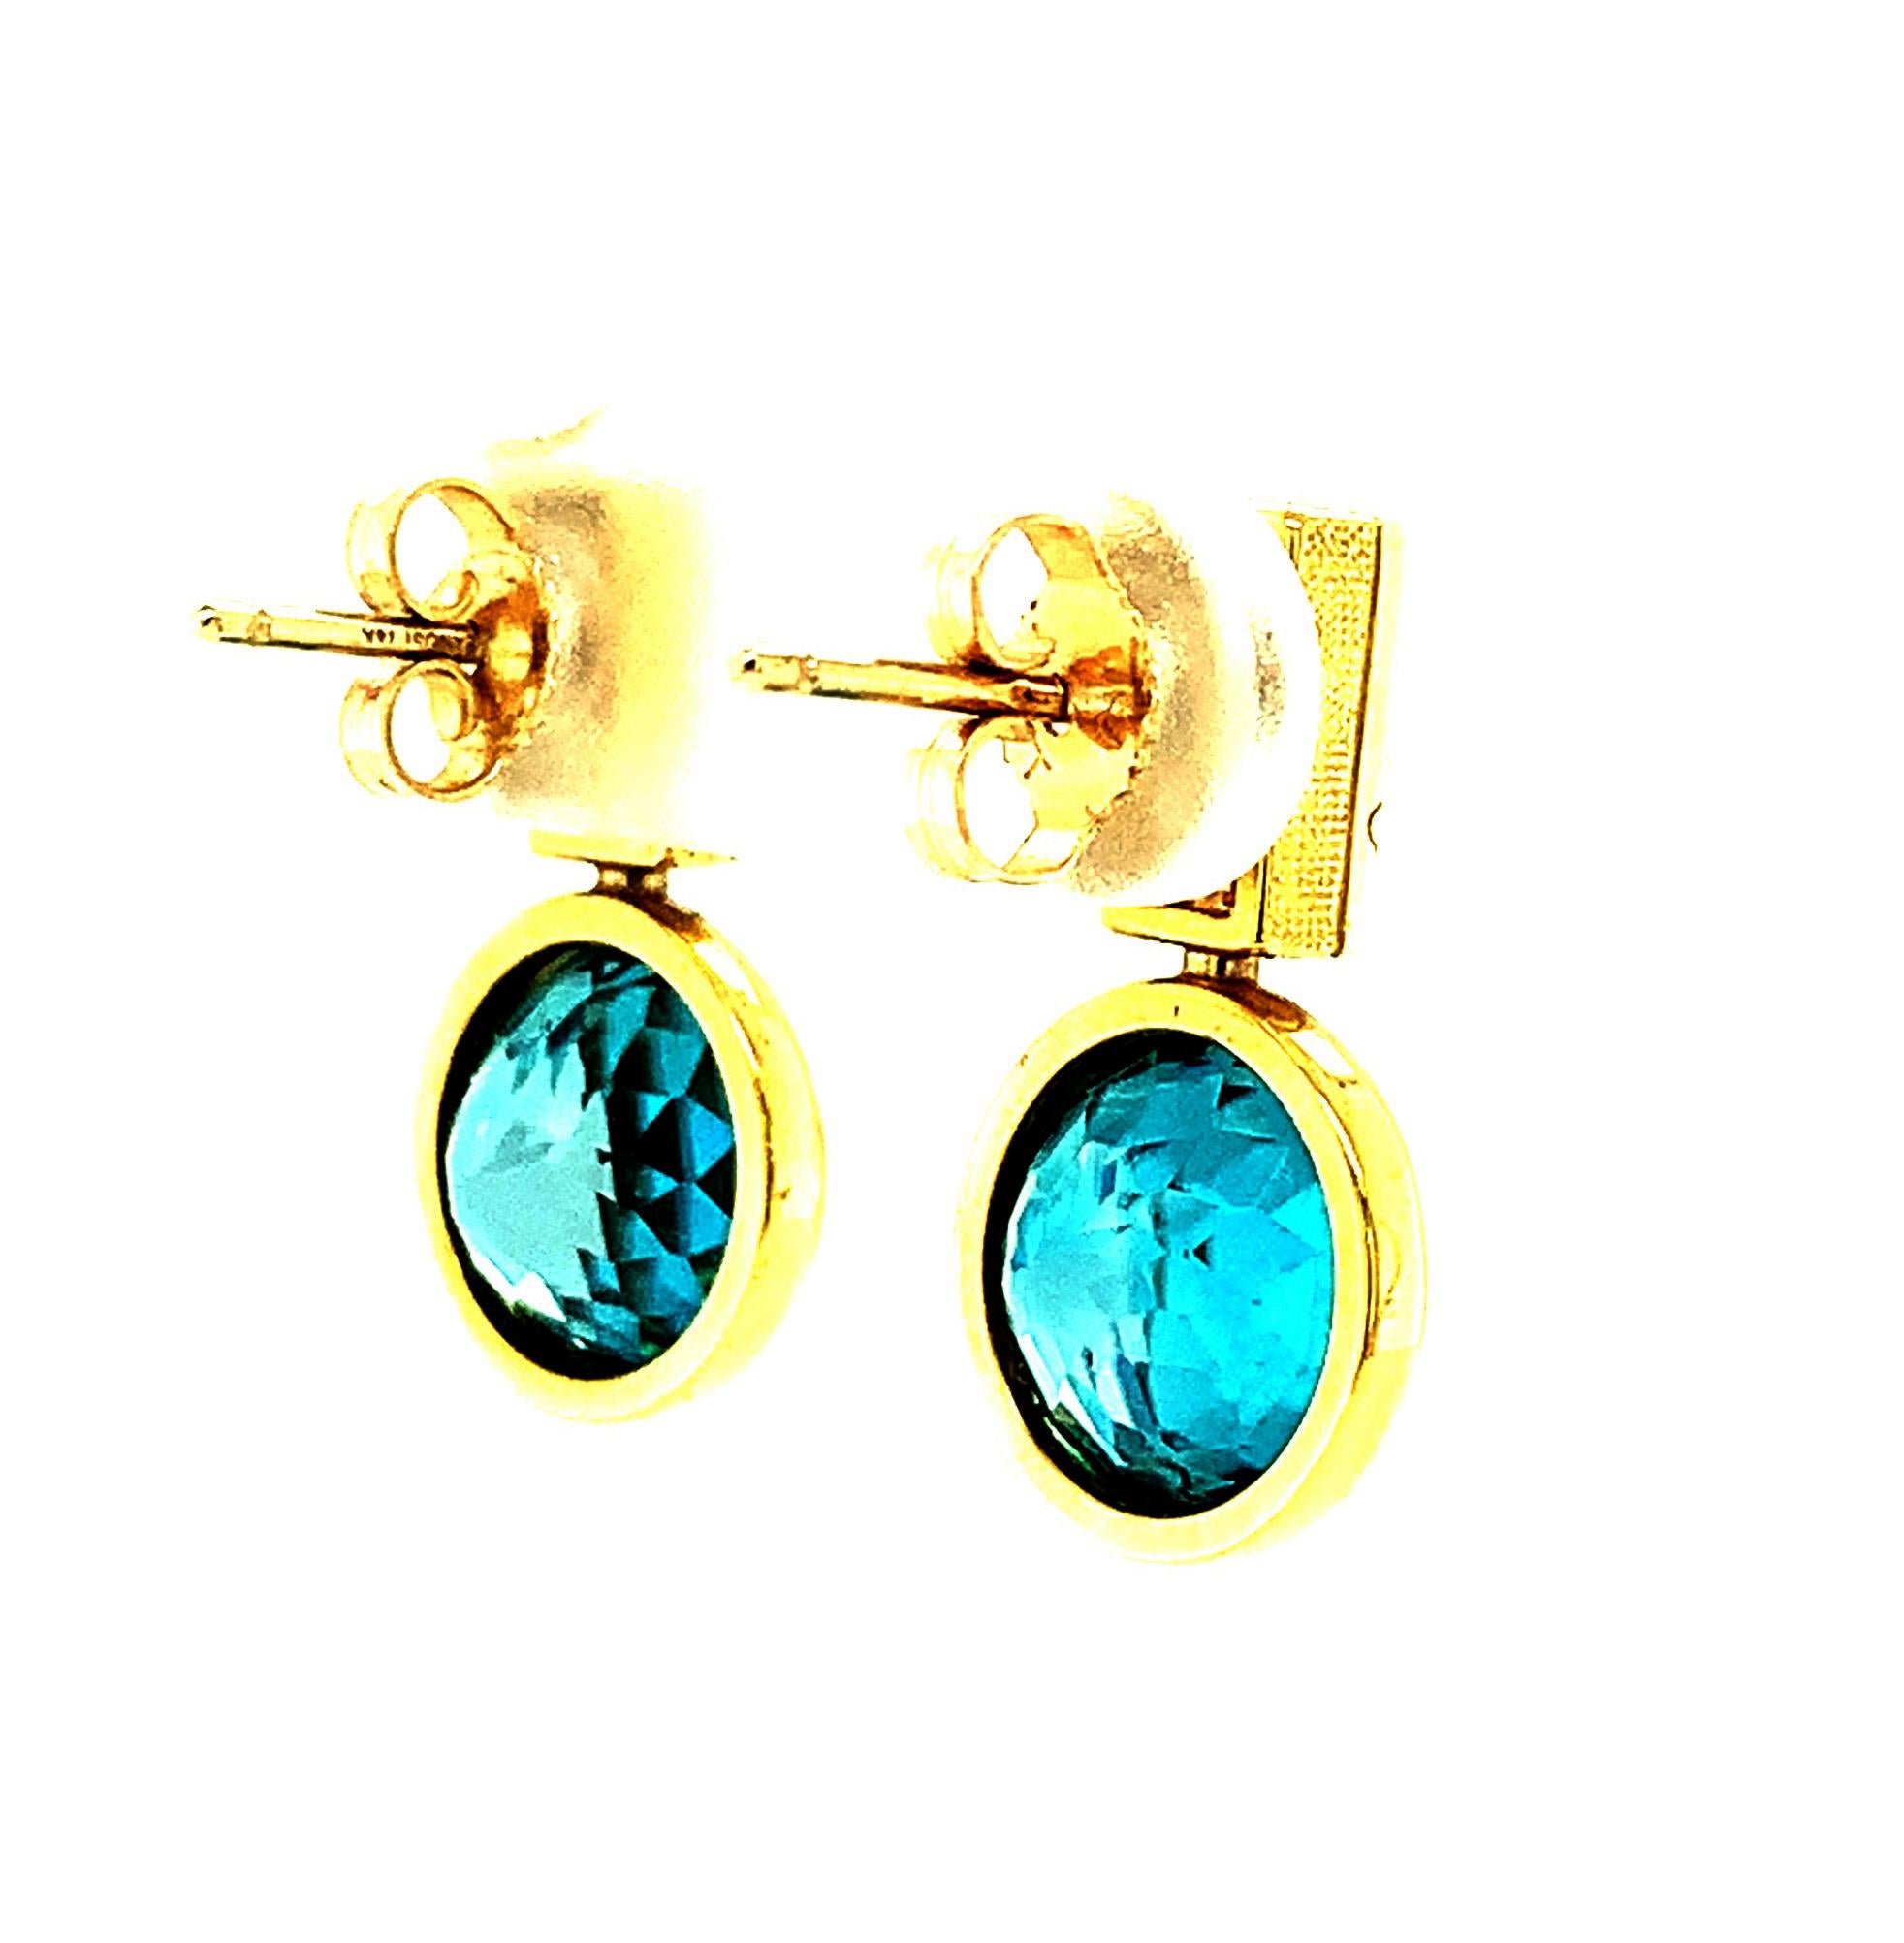 Artisan Blue Zircon and Diamond Drop Earrings in 18K Yellow Gold, 9.64 Carats Total For Sale